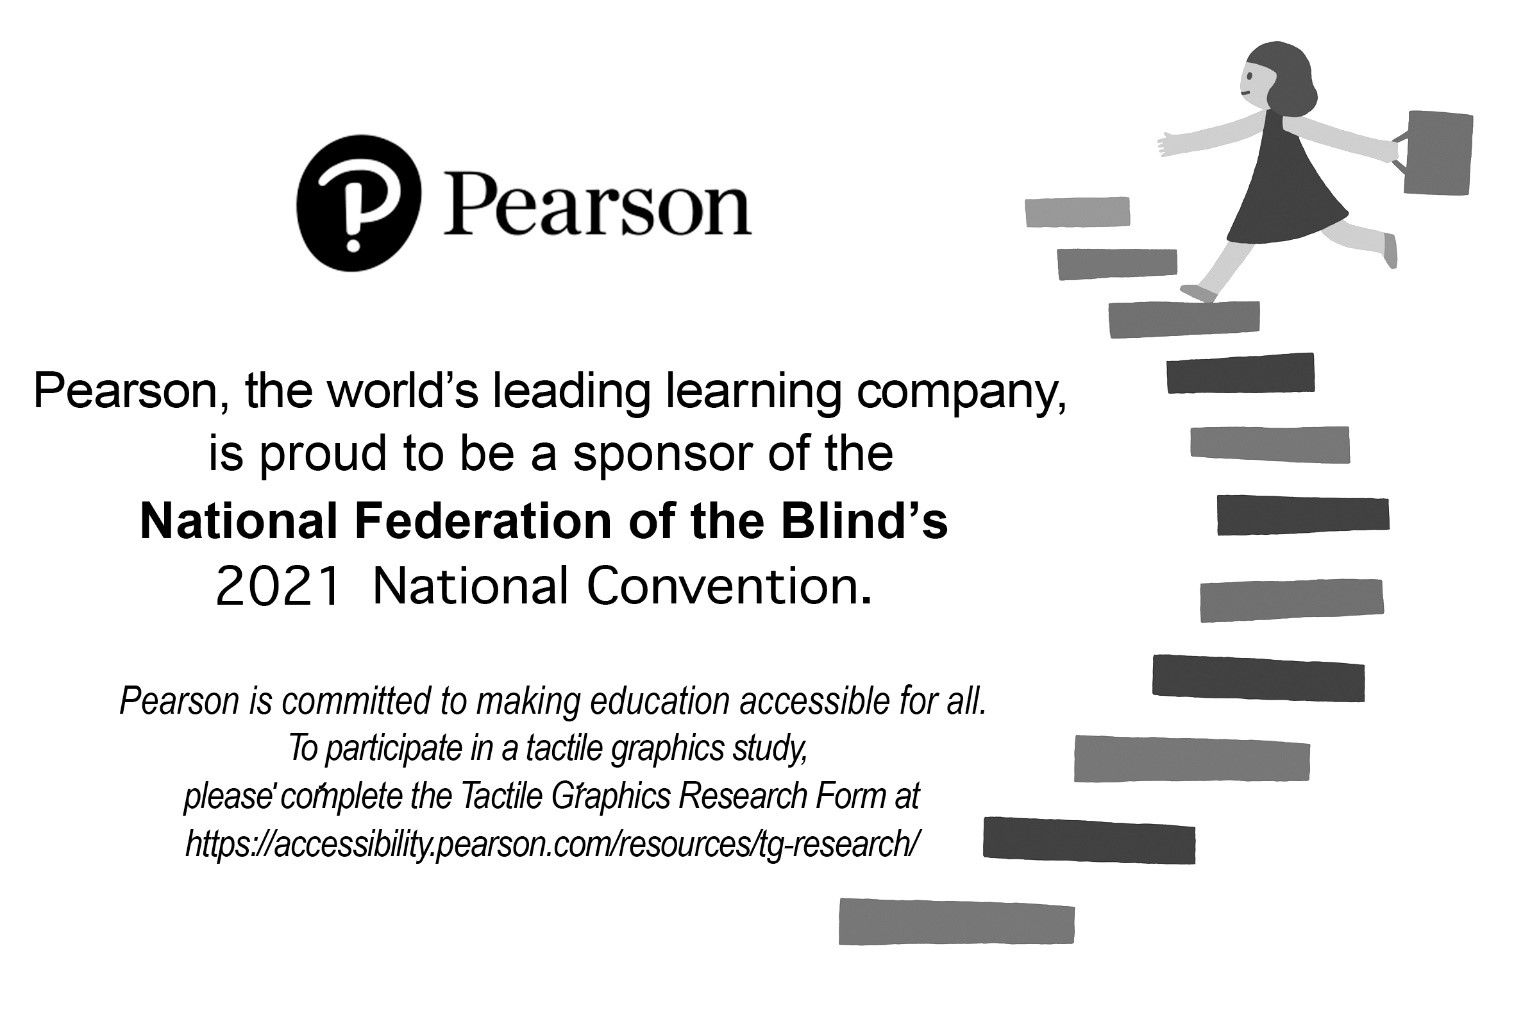 Pearson, the world’s leading learning company, is proud to be a sponsor of the National Federation of the Blind’s 2021 National Convention. Pearson is committed to making education accessible for all. To participate in a tactile graphics study, please complete the Tactile Graphics Research Form at https://accessibilty.pearson.com/resources/tg-research/